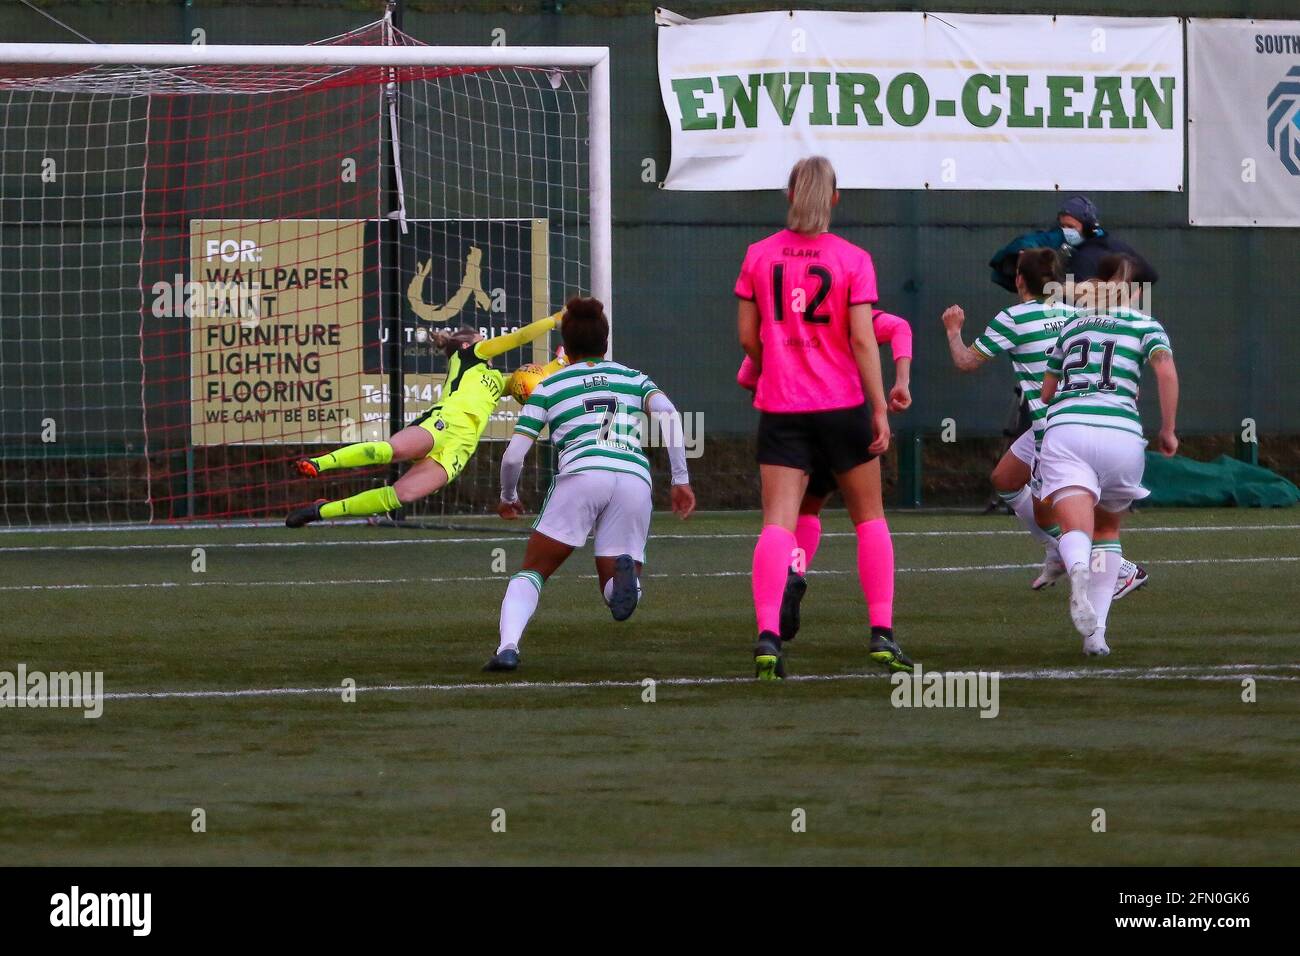 East Kilbride, UK. 12th May, 2021. PENALTY! - Erin Clachers (#25) of Glasgow City FC saves low to her left to keep the scores level during the Scottish Building Society Scottish Women's Premier League 1 Fixture Celtic FC Vs Glasgow City, K-Park Training Academy, East Kilbride, Glasgow, 12/05/2021 | Credit: Colin Poultney/Alamy Live News Stock Photo